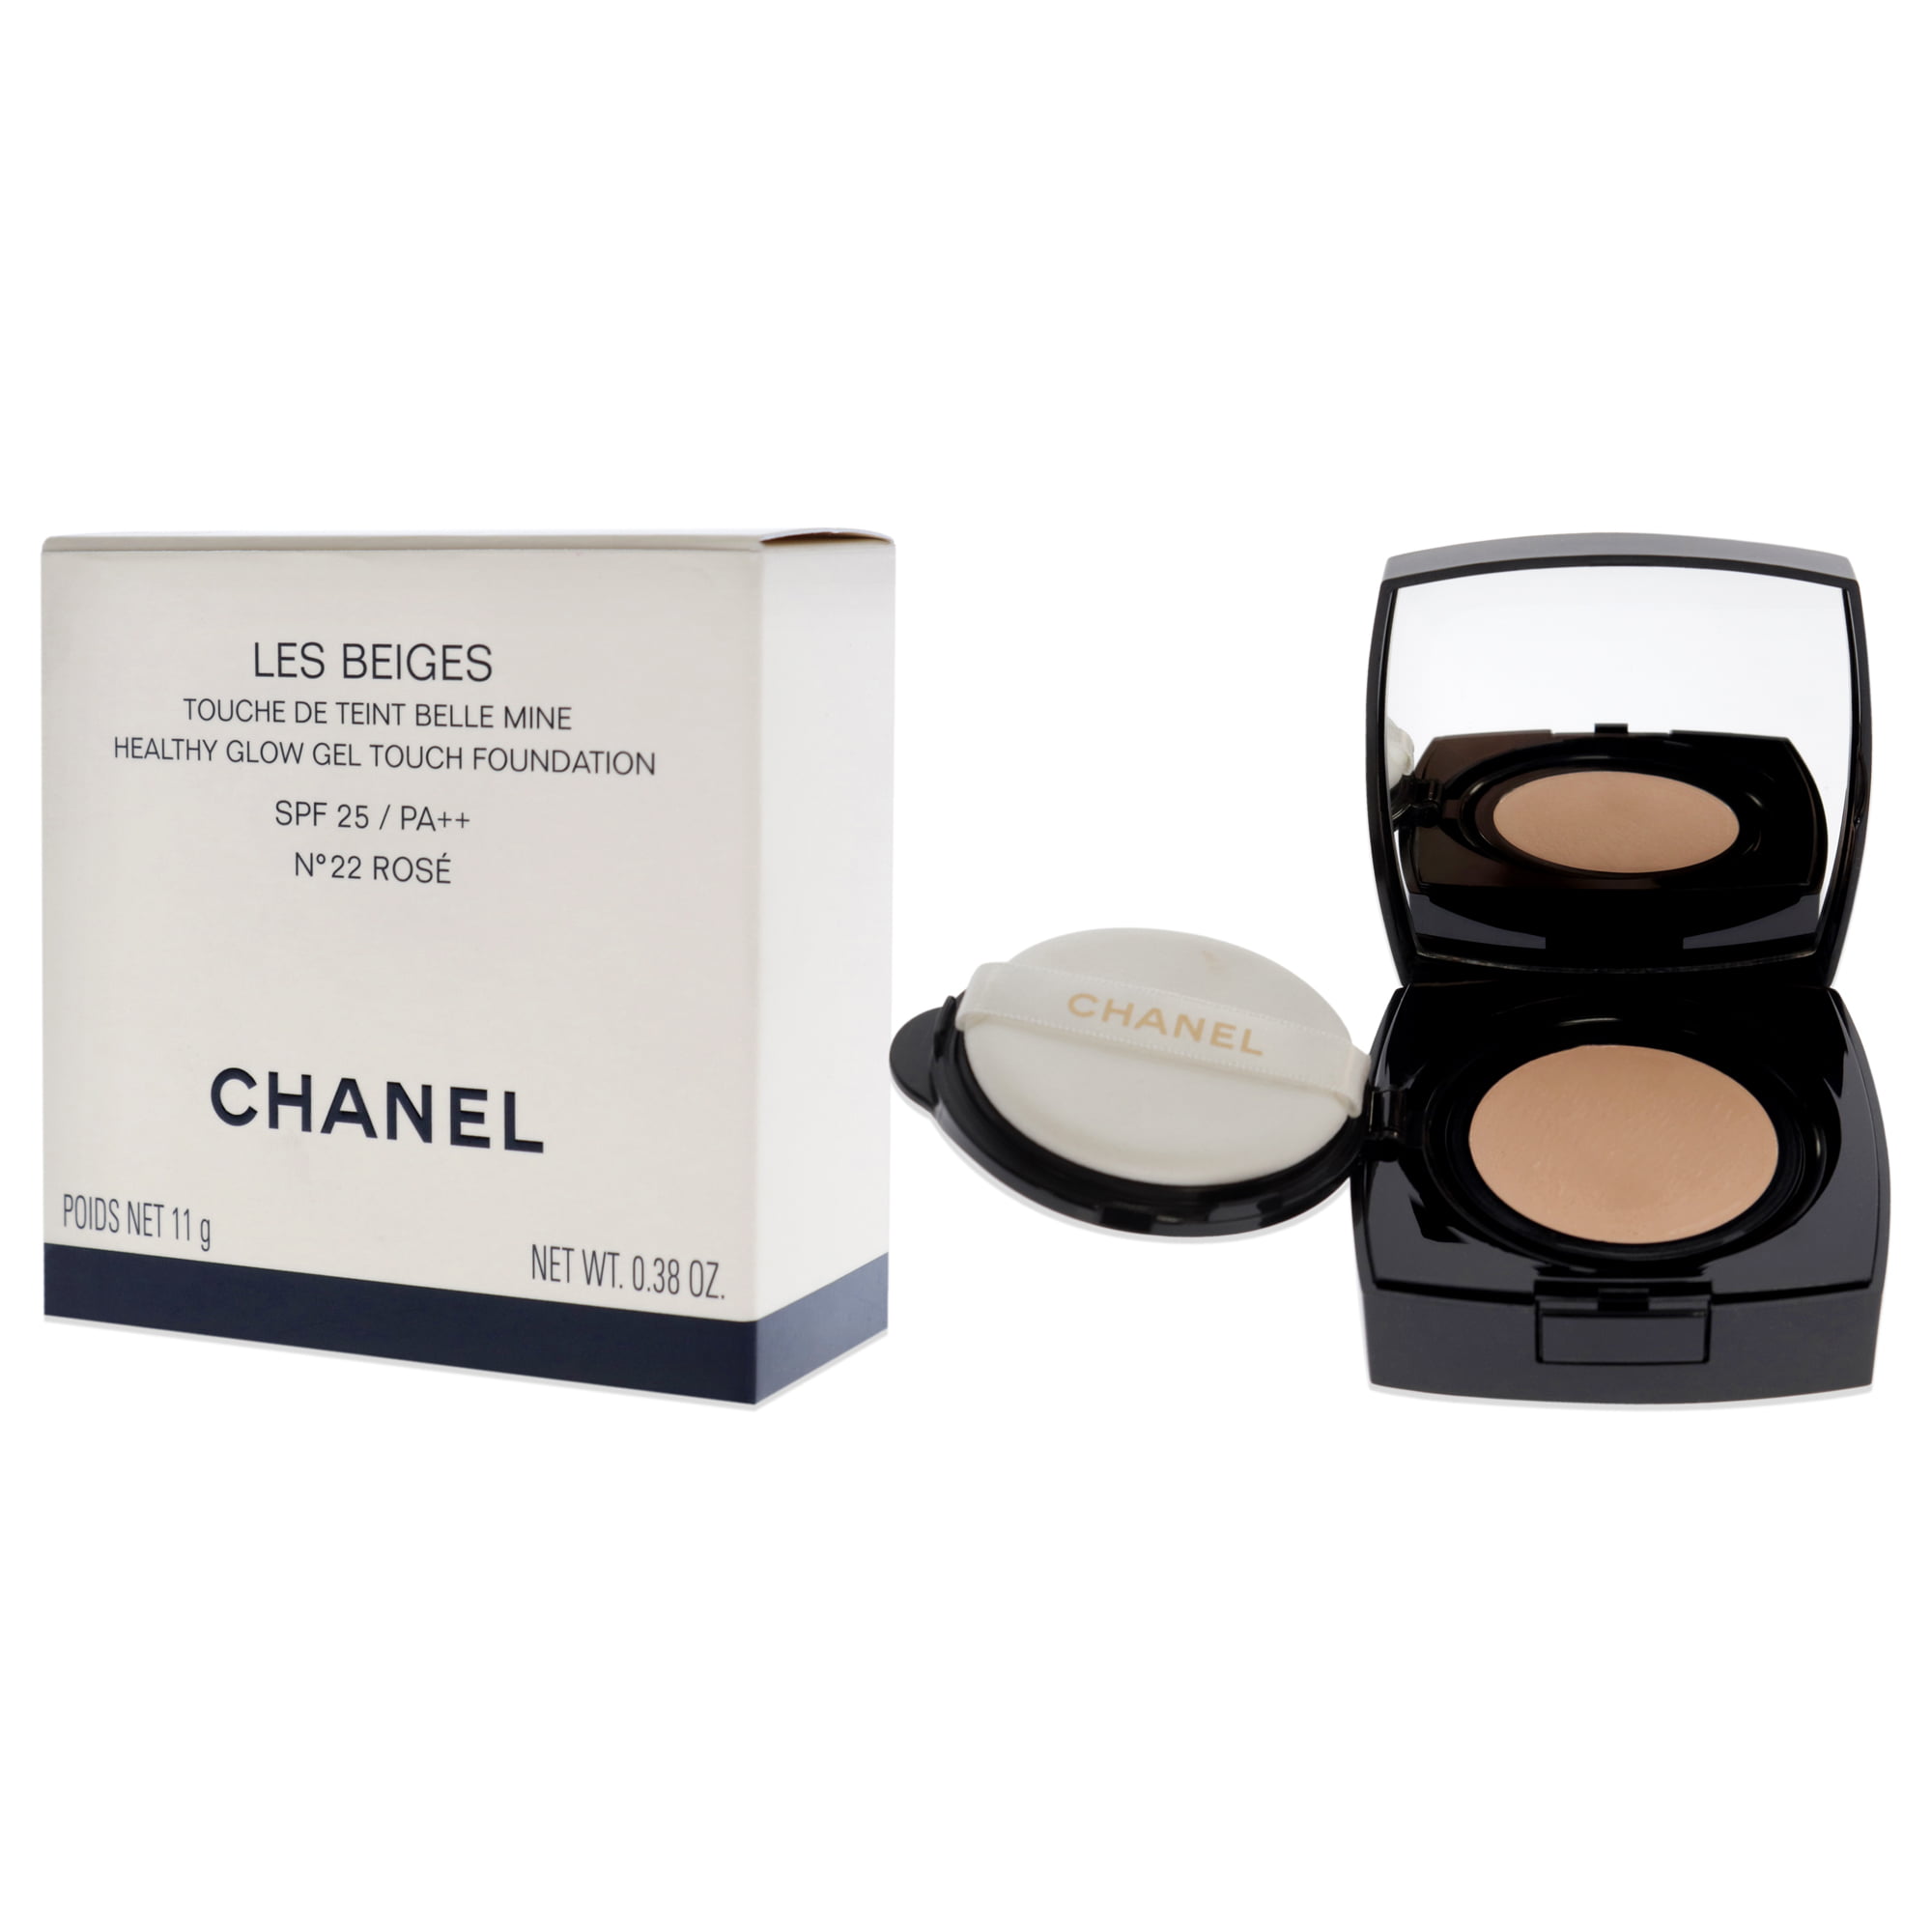 Foundation 411: New CHANEL Les Beiges Healthy Glow Gel Touch Cushion  Foundation Full Review 